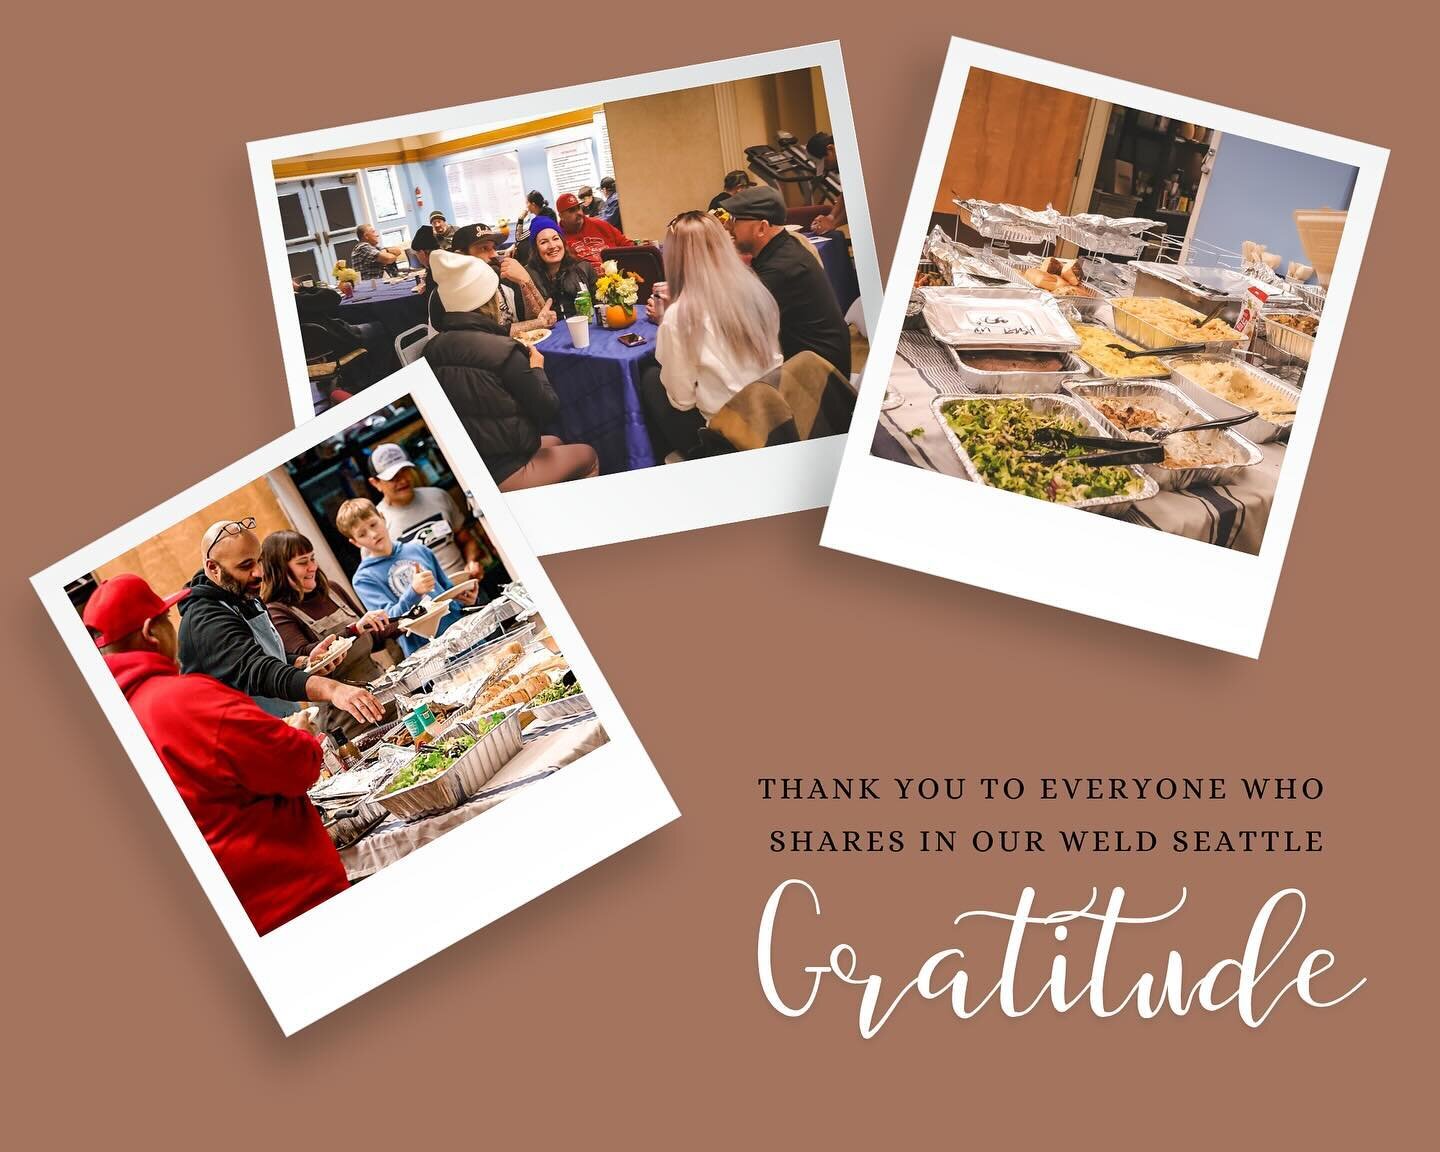 We're taking a moment to express our deepest thanks for the incredible generosity we've witnessed this giving season. As your donations continue to arrive in support of our mission we need to give a special shoutout to our volunteers, staff, and comm